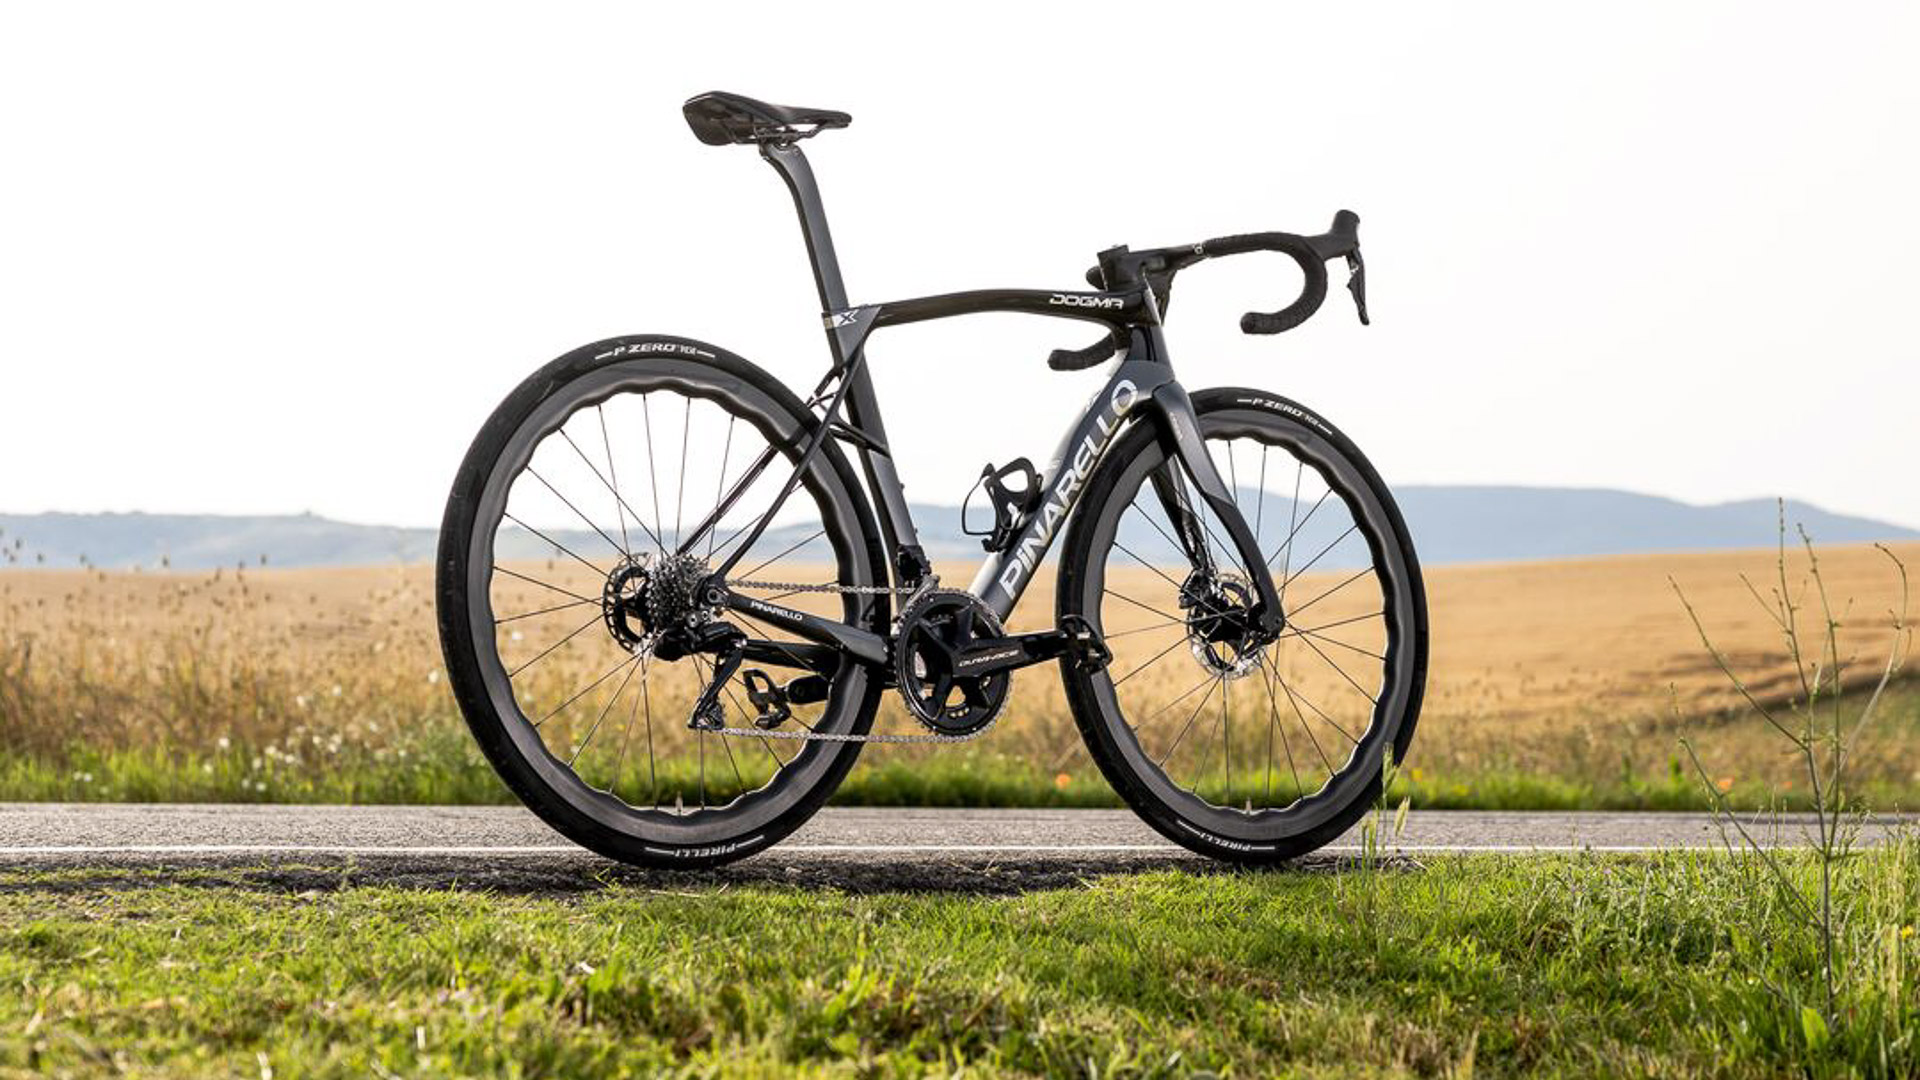 Pinarello's new Dogma X endurance bike. The bike is pictured along a road side in a rural setting with rolling hills in the far background, golden fields just behind the bike with the bike standing seemingly unaided on the tarmac edge by a grassy border. The image is side on and slightly from the rear to showcase the X-Stay seat stay design.